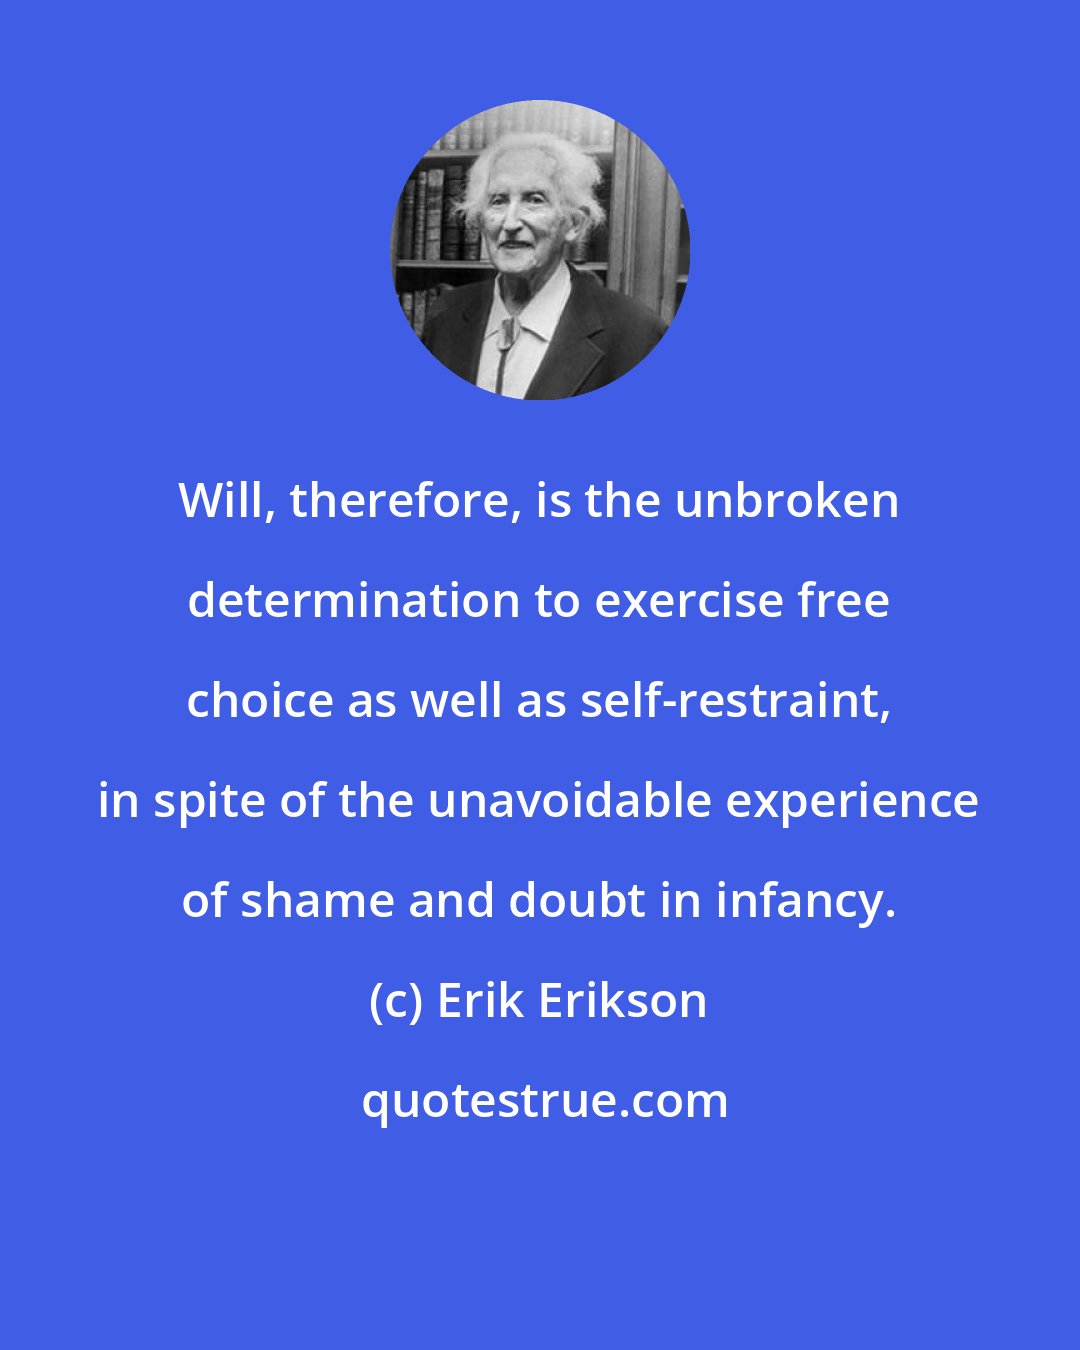 Erik Erikson: Will, therefore, is the unbroken determination to exercise free choice as well as self-restraint, in spite of the unavoidable experience of shame and doubt in infancy.